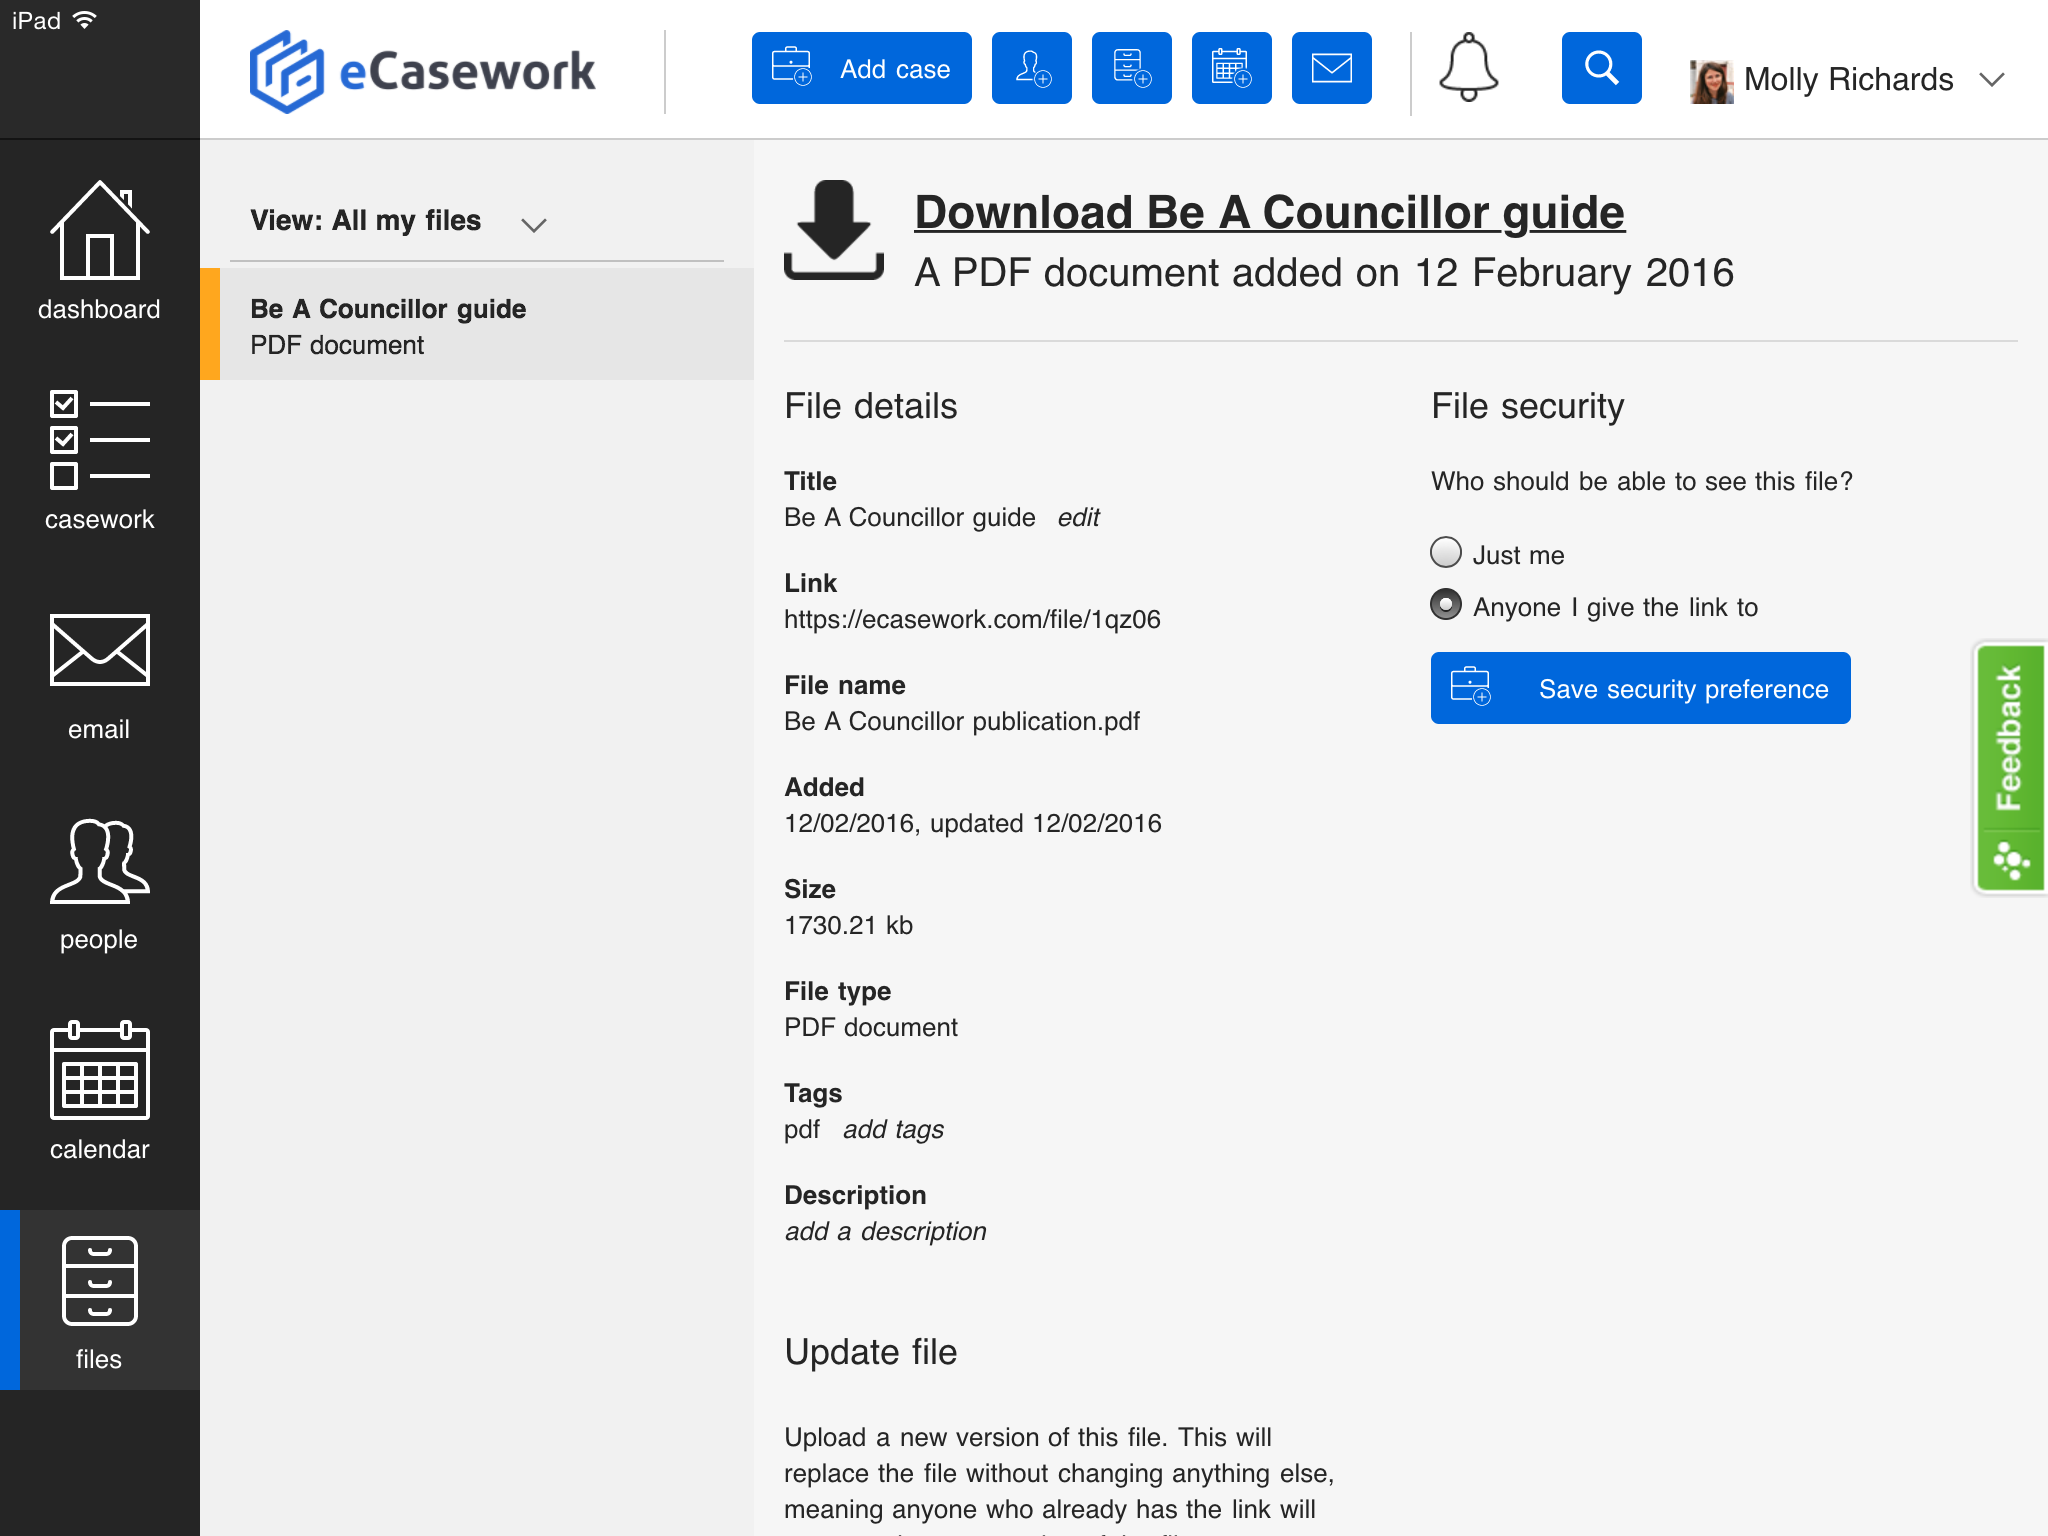 A screenshot of the eCasework files section